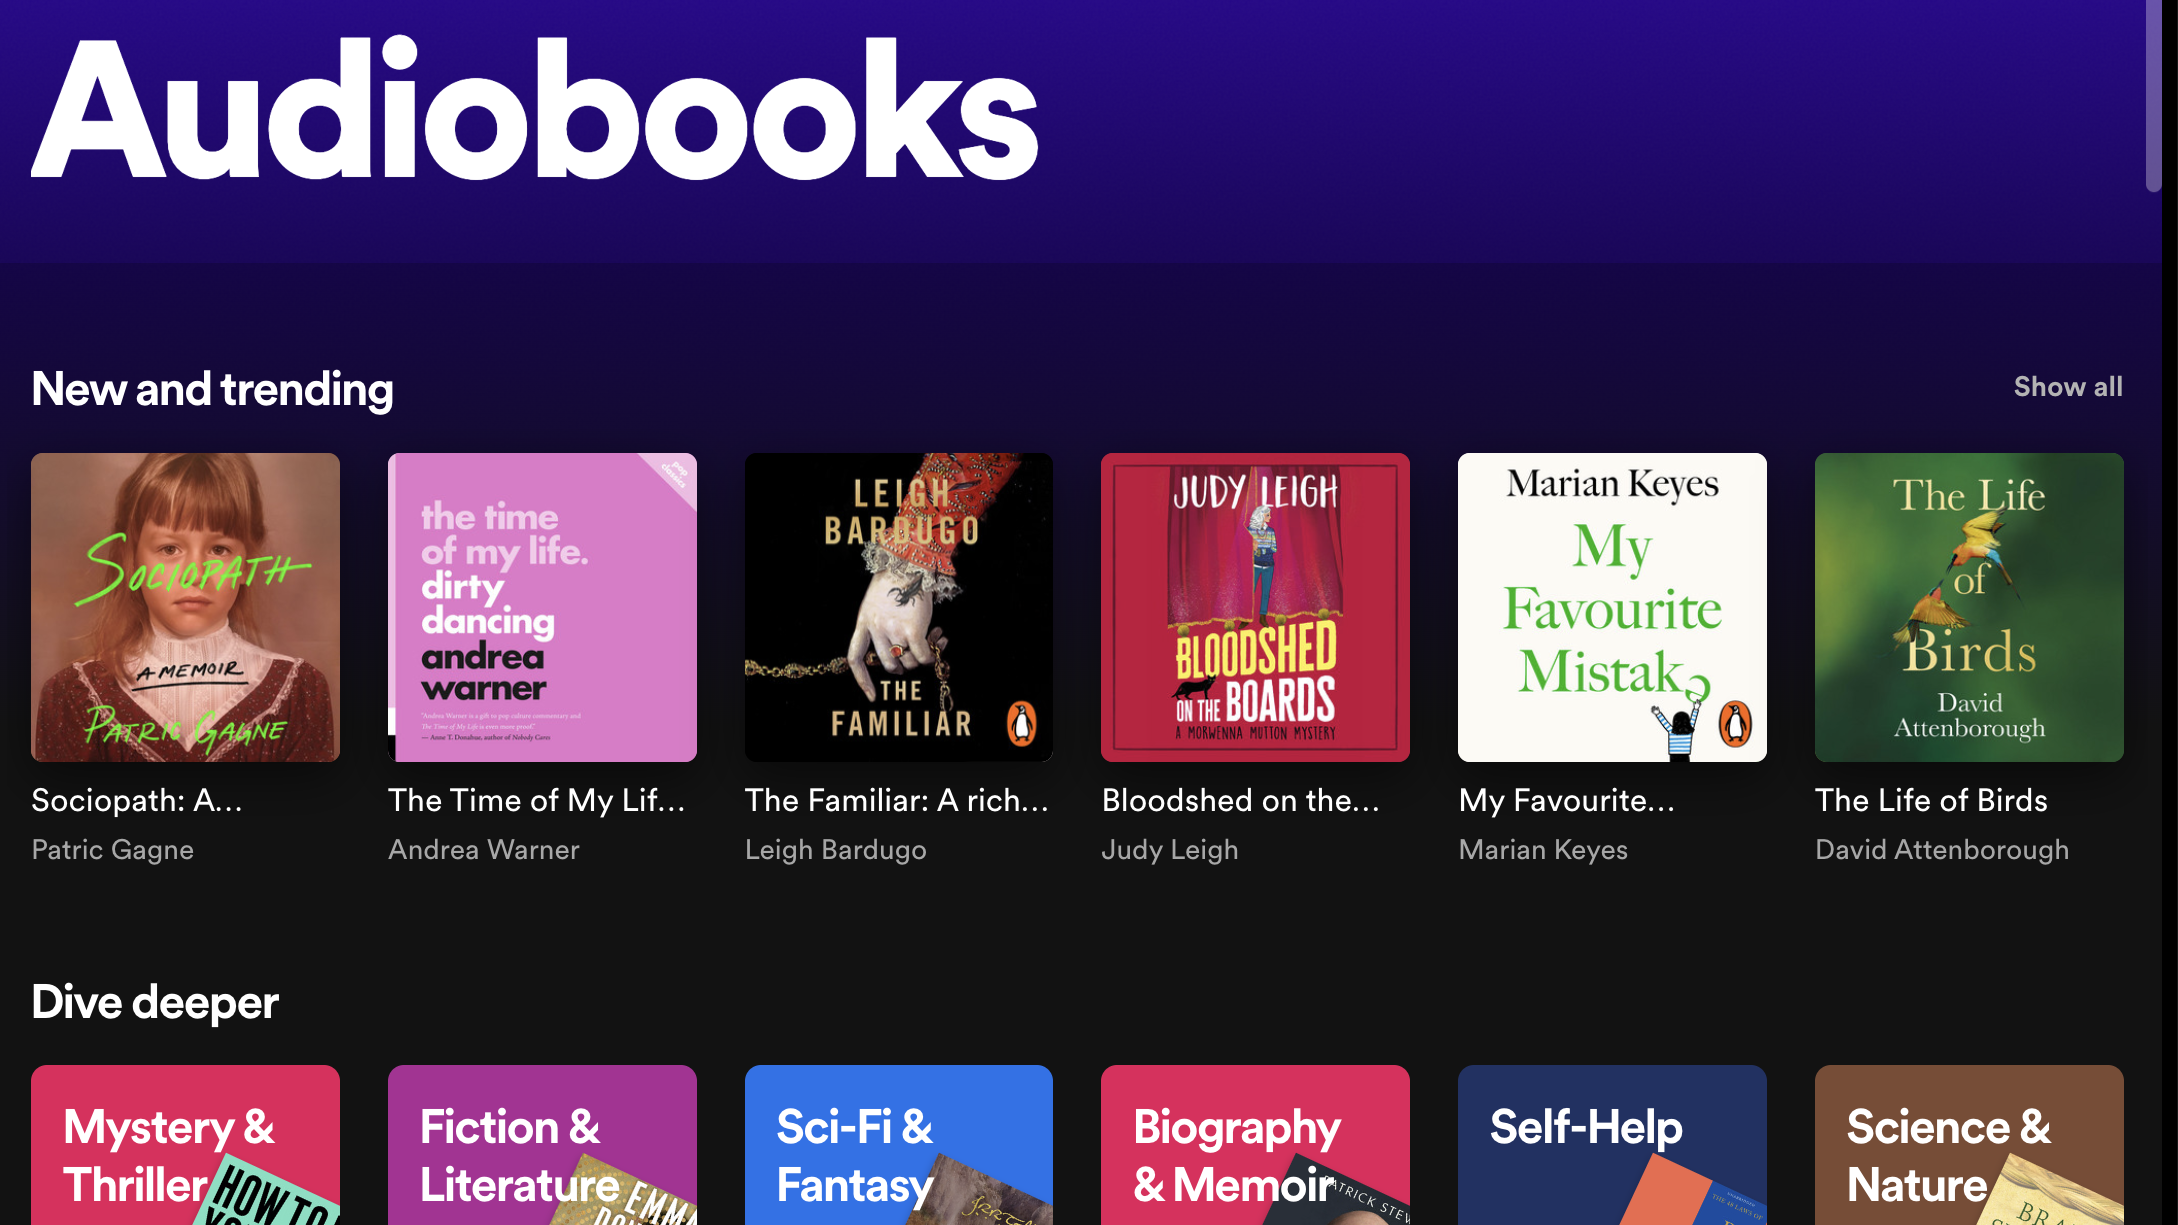 Screenshots of the Spotify audiobook offering.